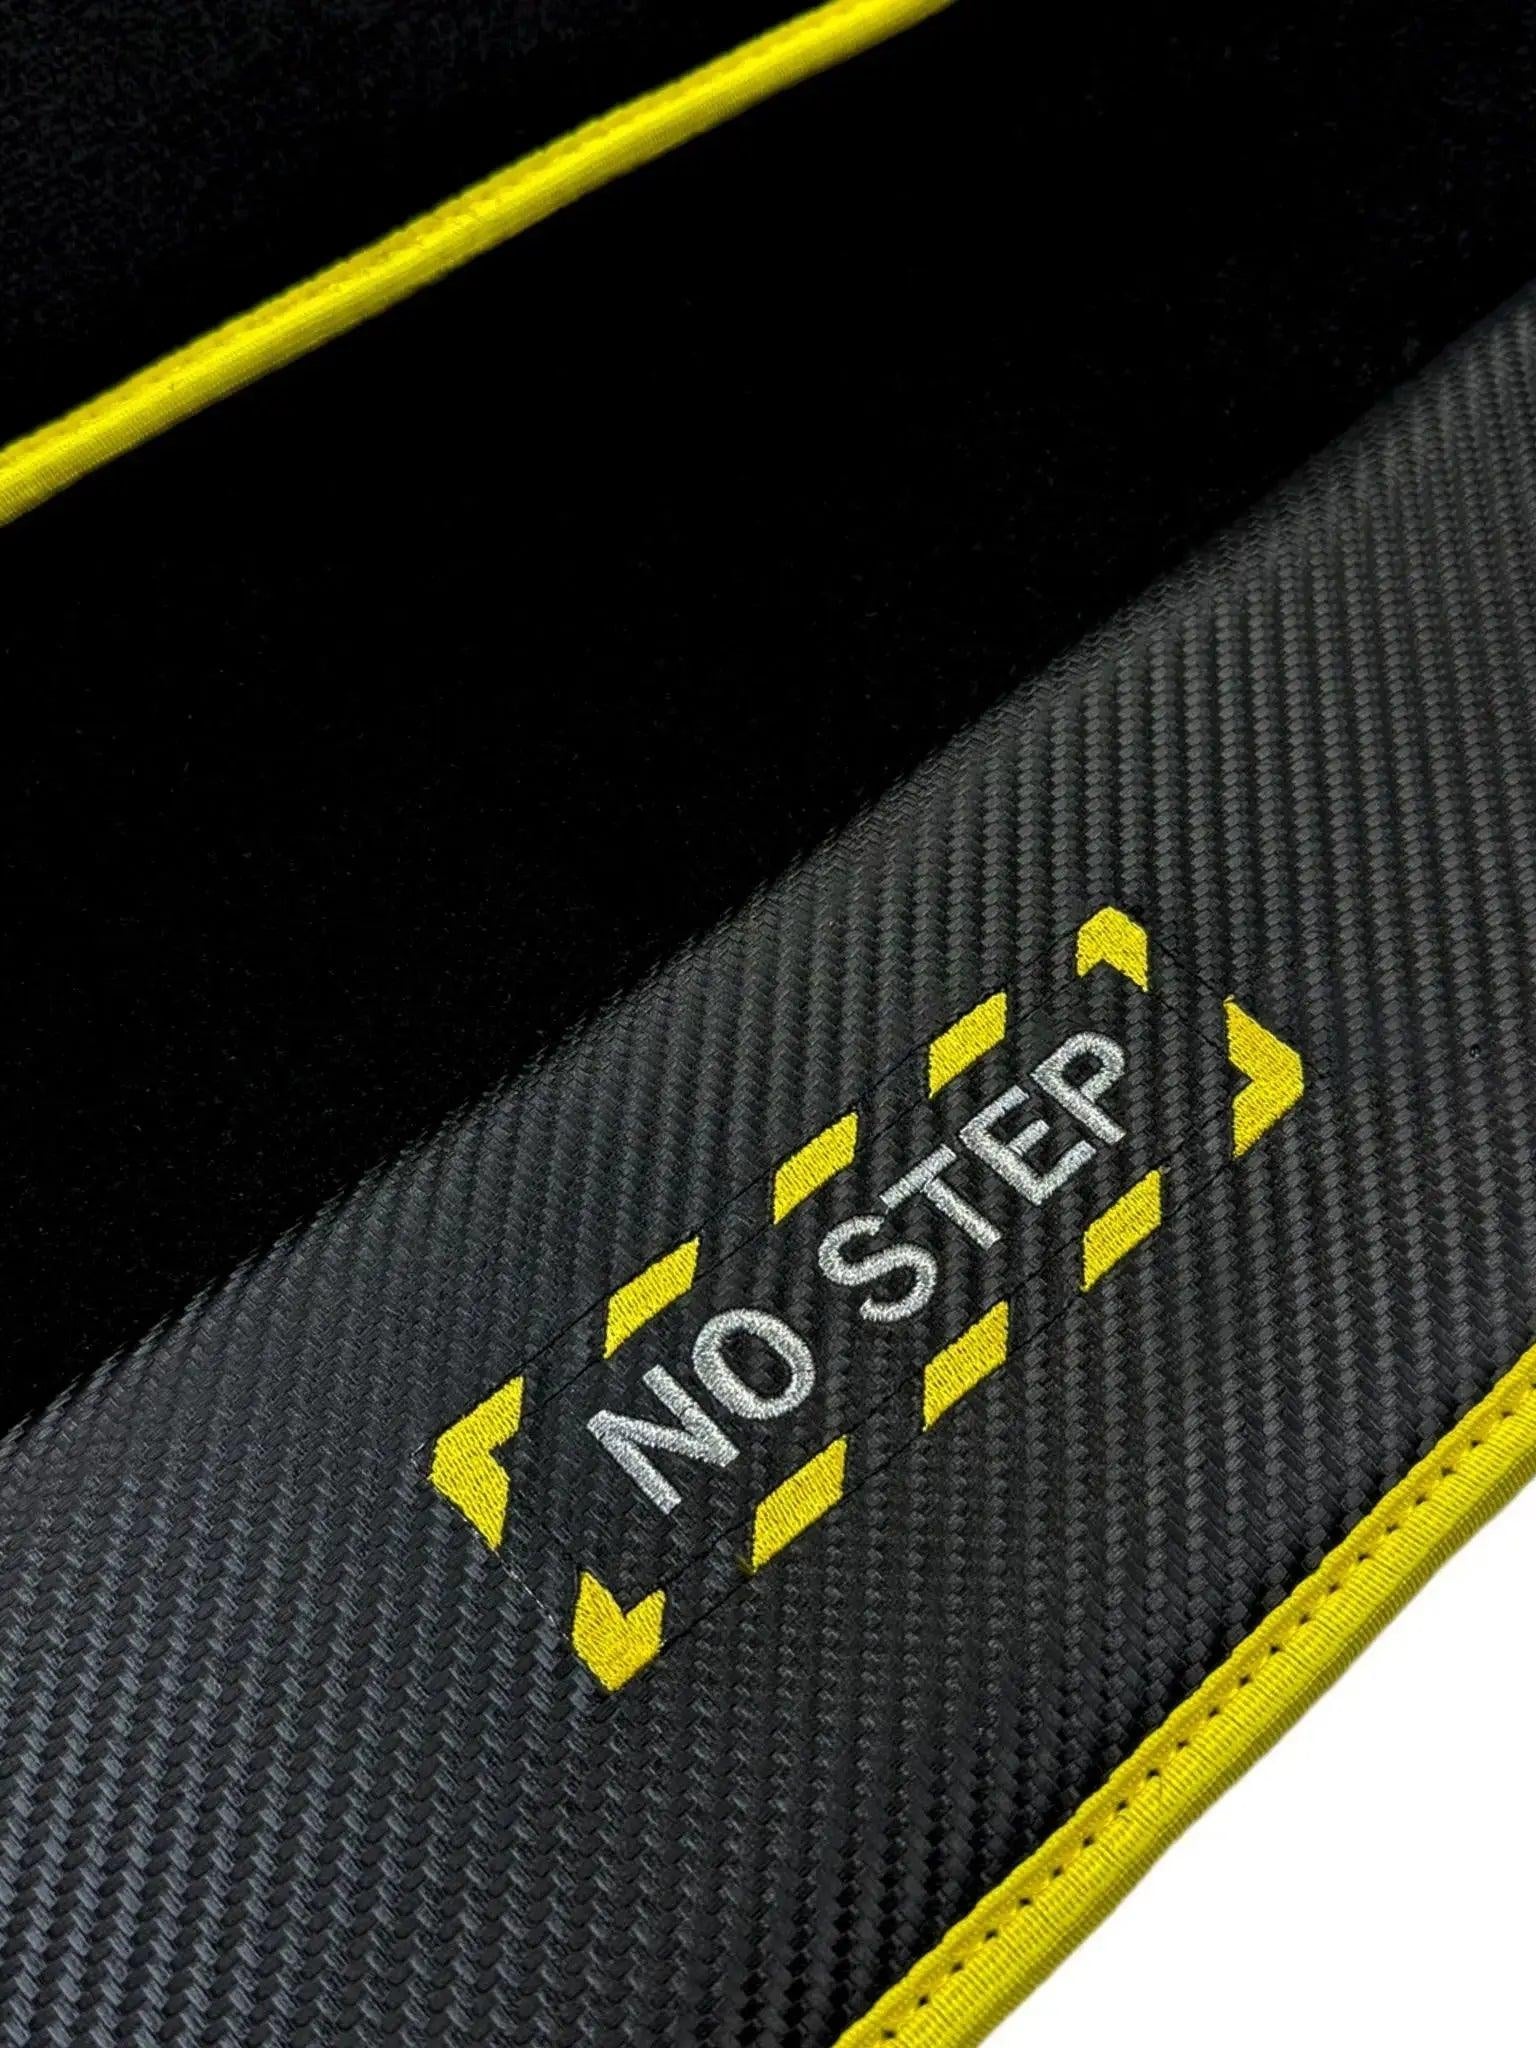 Black Floor Mats For BMW 6 Series F12 | Fighter Jet Edition | Yellow Trim AutoWin Brand - AutoWin